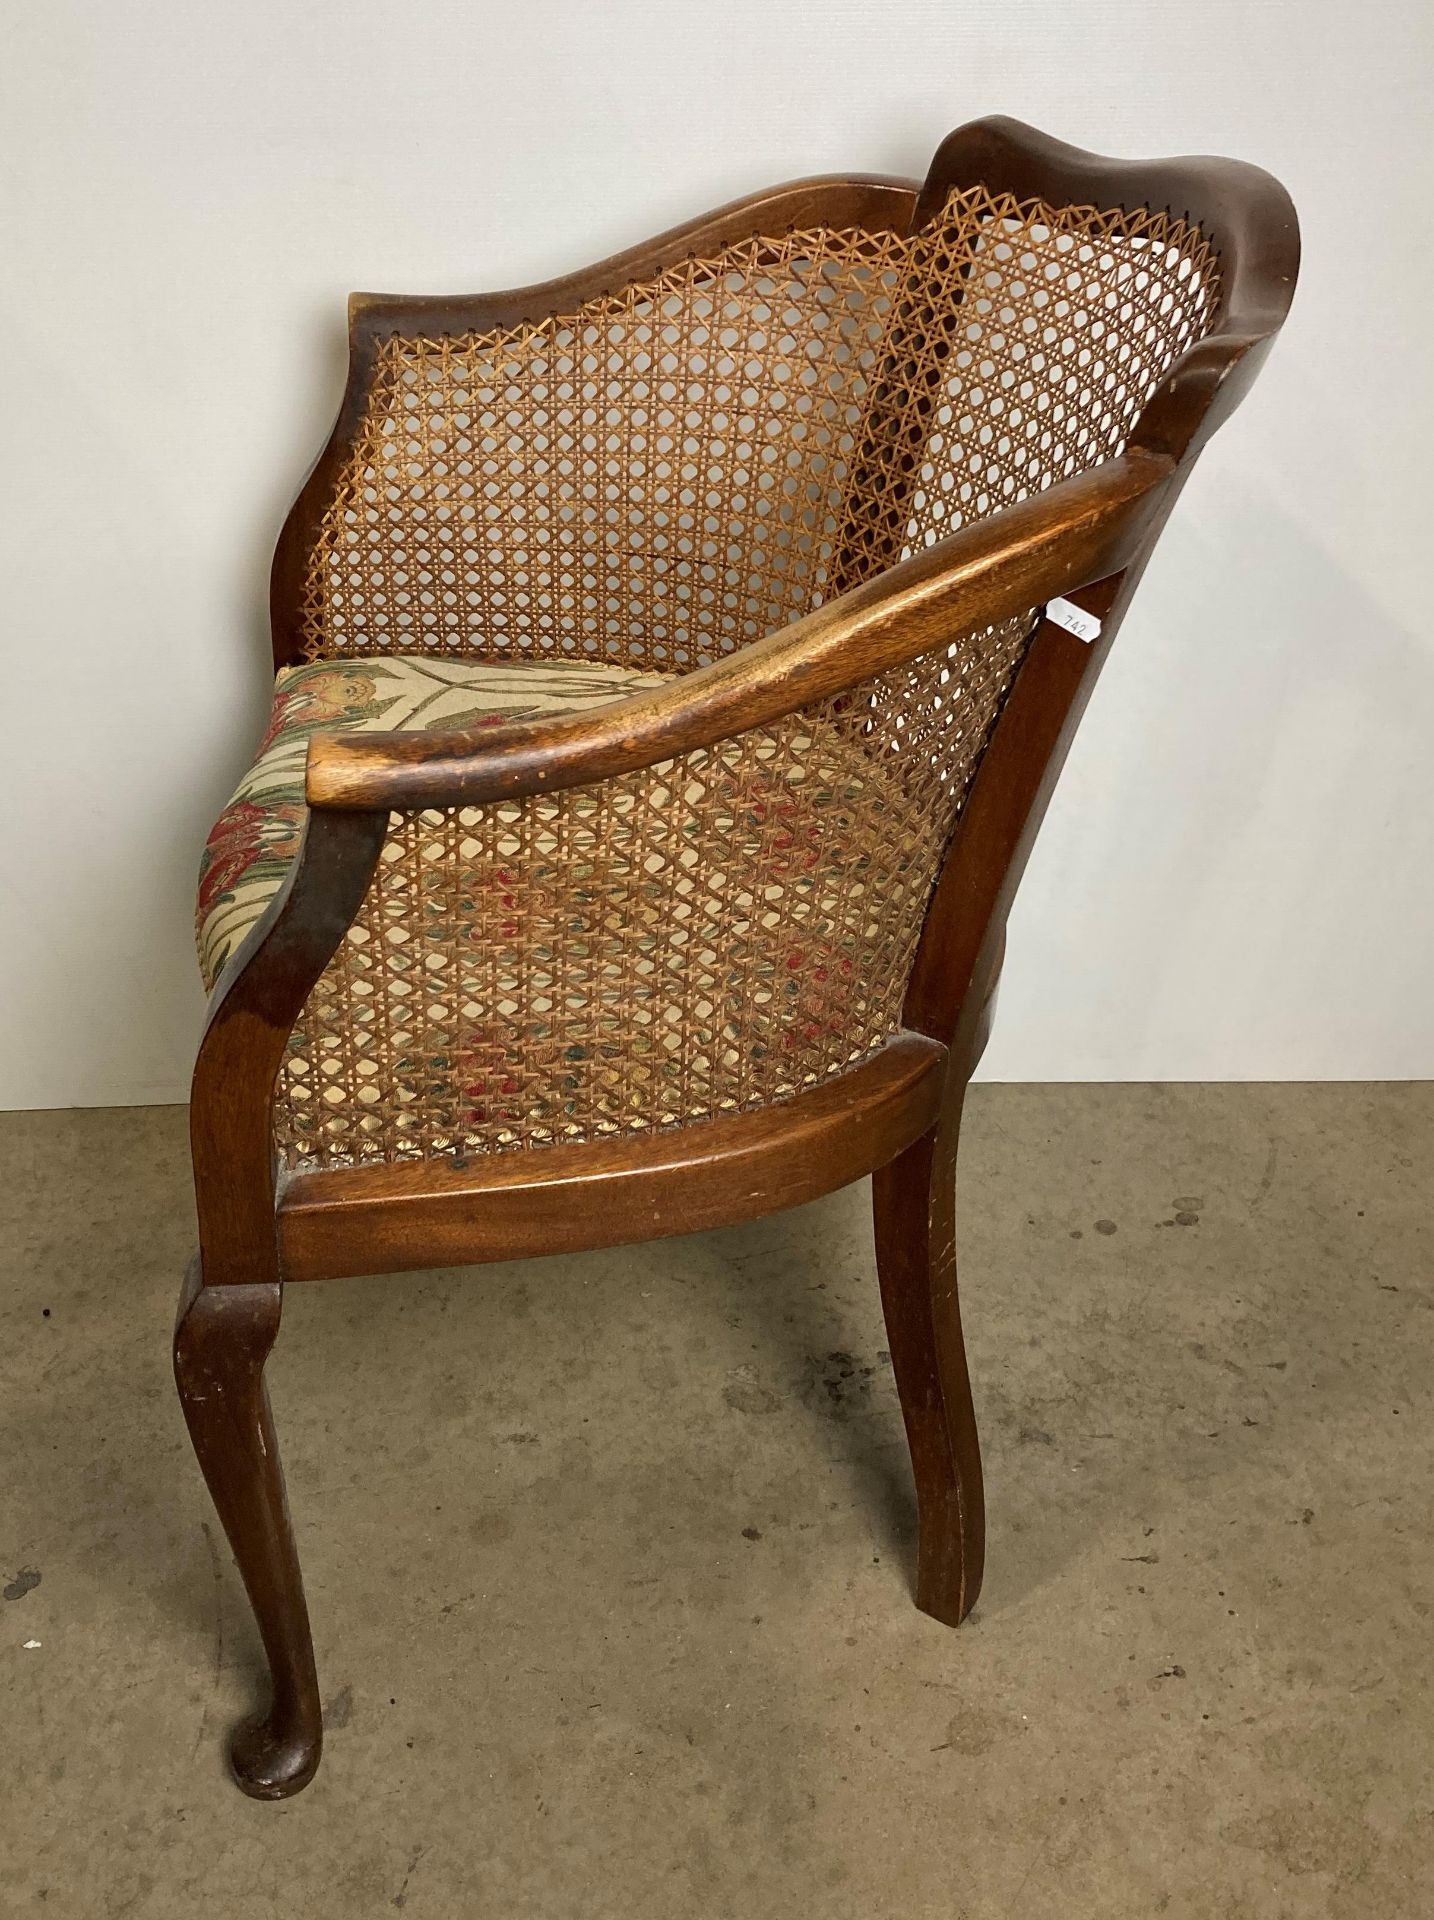 A vintage Bergère armchair with floral upholstered seat fabric (saleroom location: S2 QB13) - Image 3 of 5